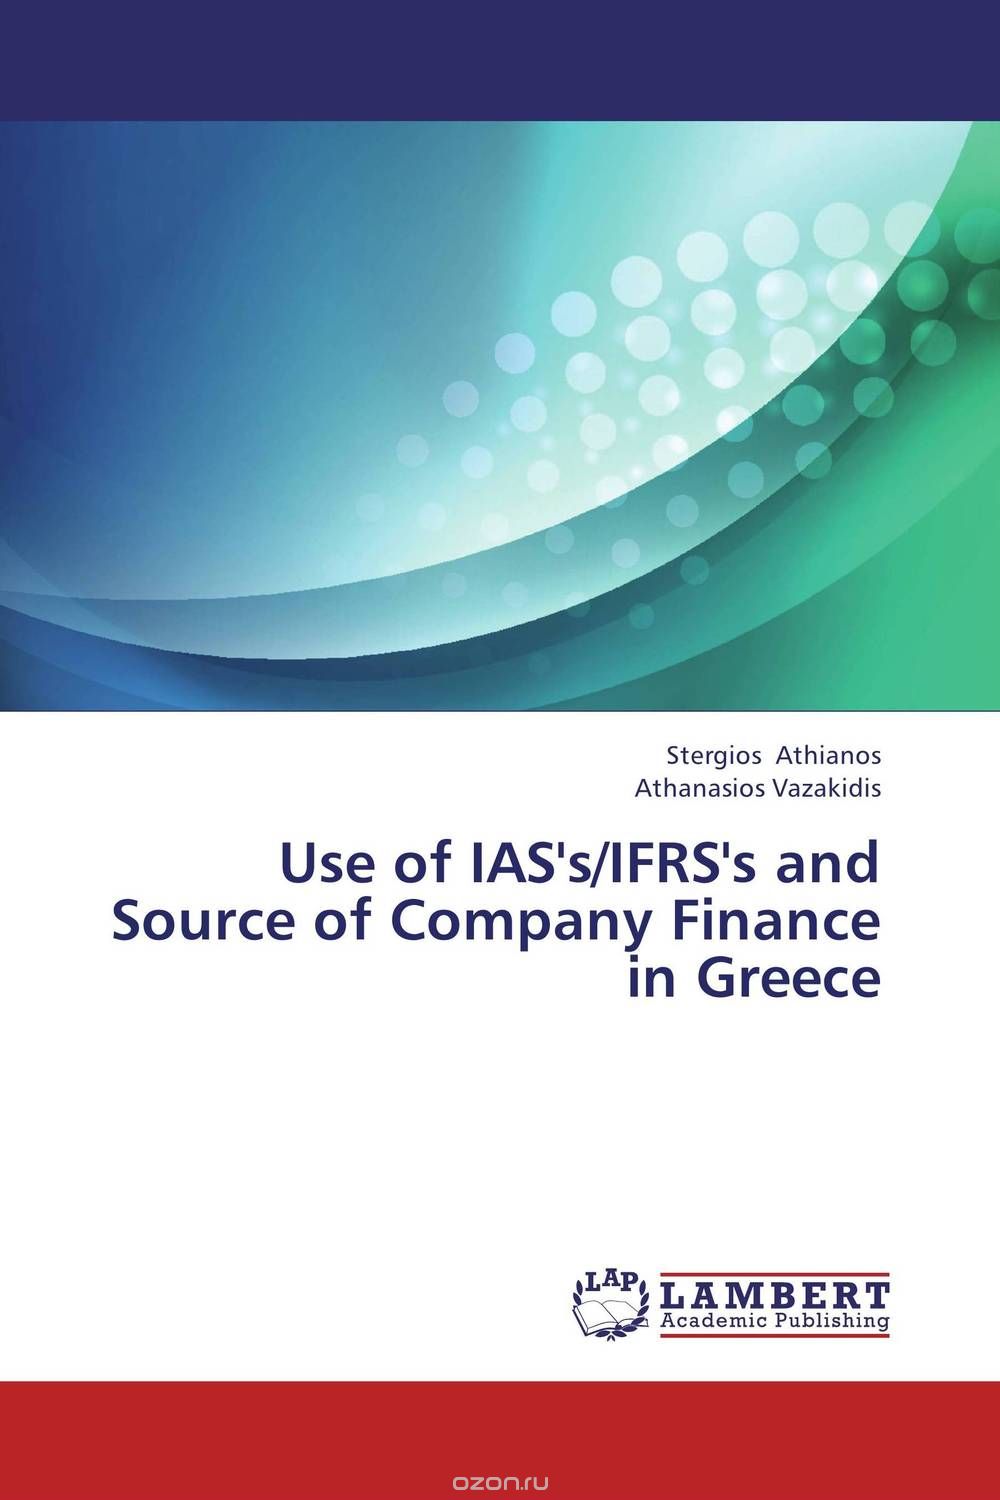 Use of IAS's/IFRS's and Source of Company Finance in Greece